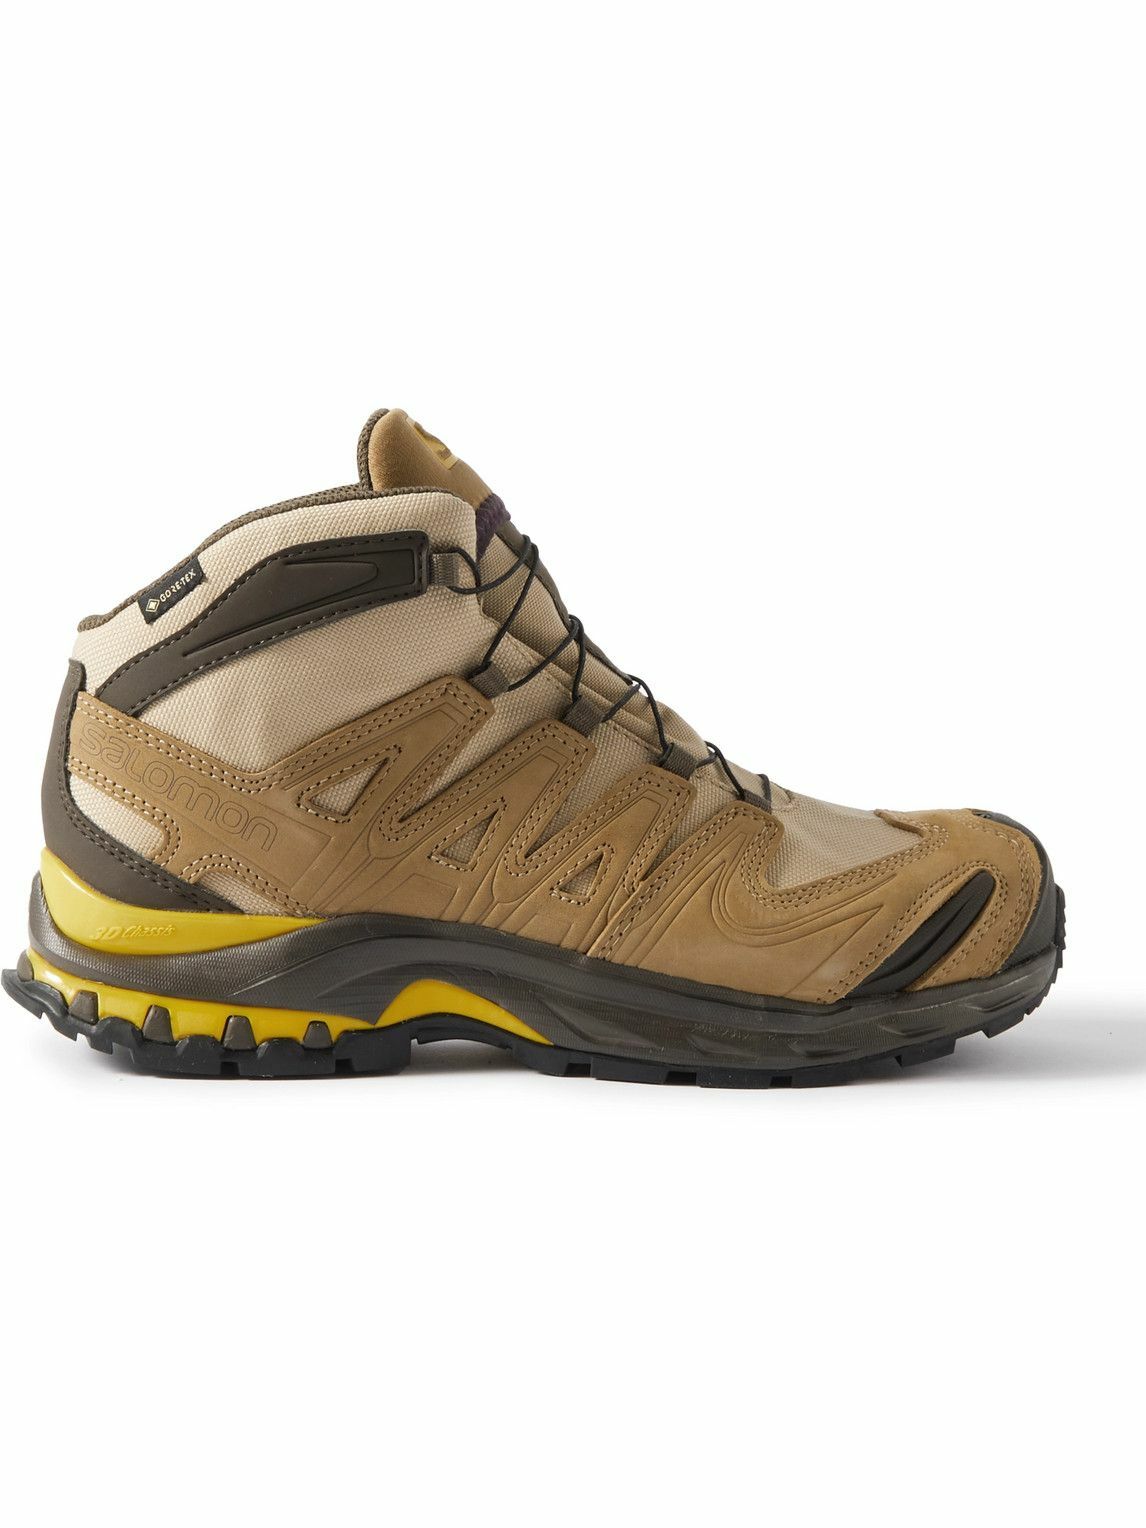 Photo: Salomon - Better Gift Shop XA Pro 3D GORE-TEX®, Leather and Rubber Sneakers - Brown